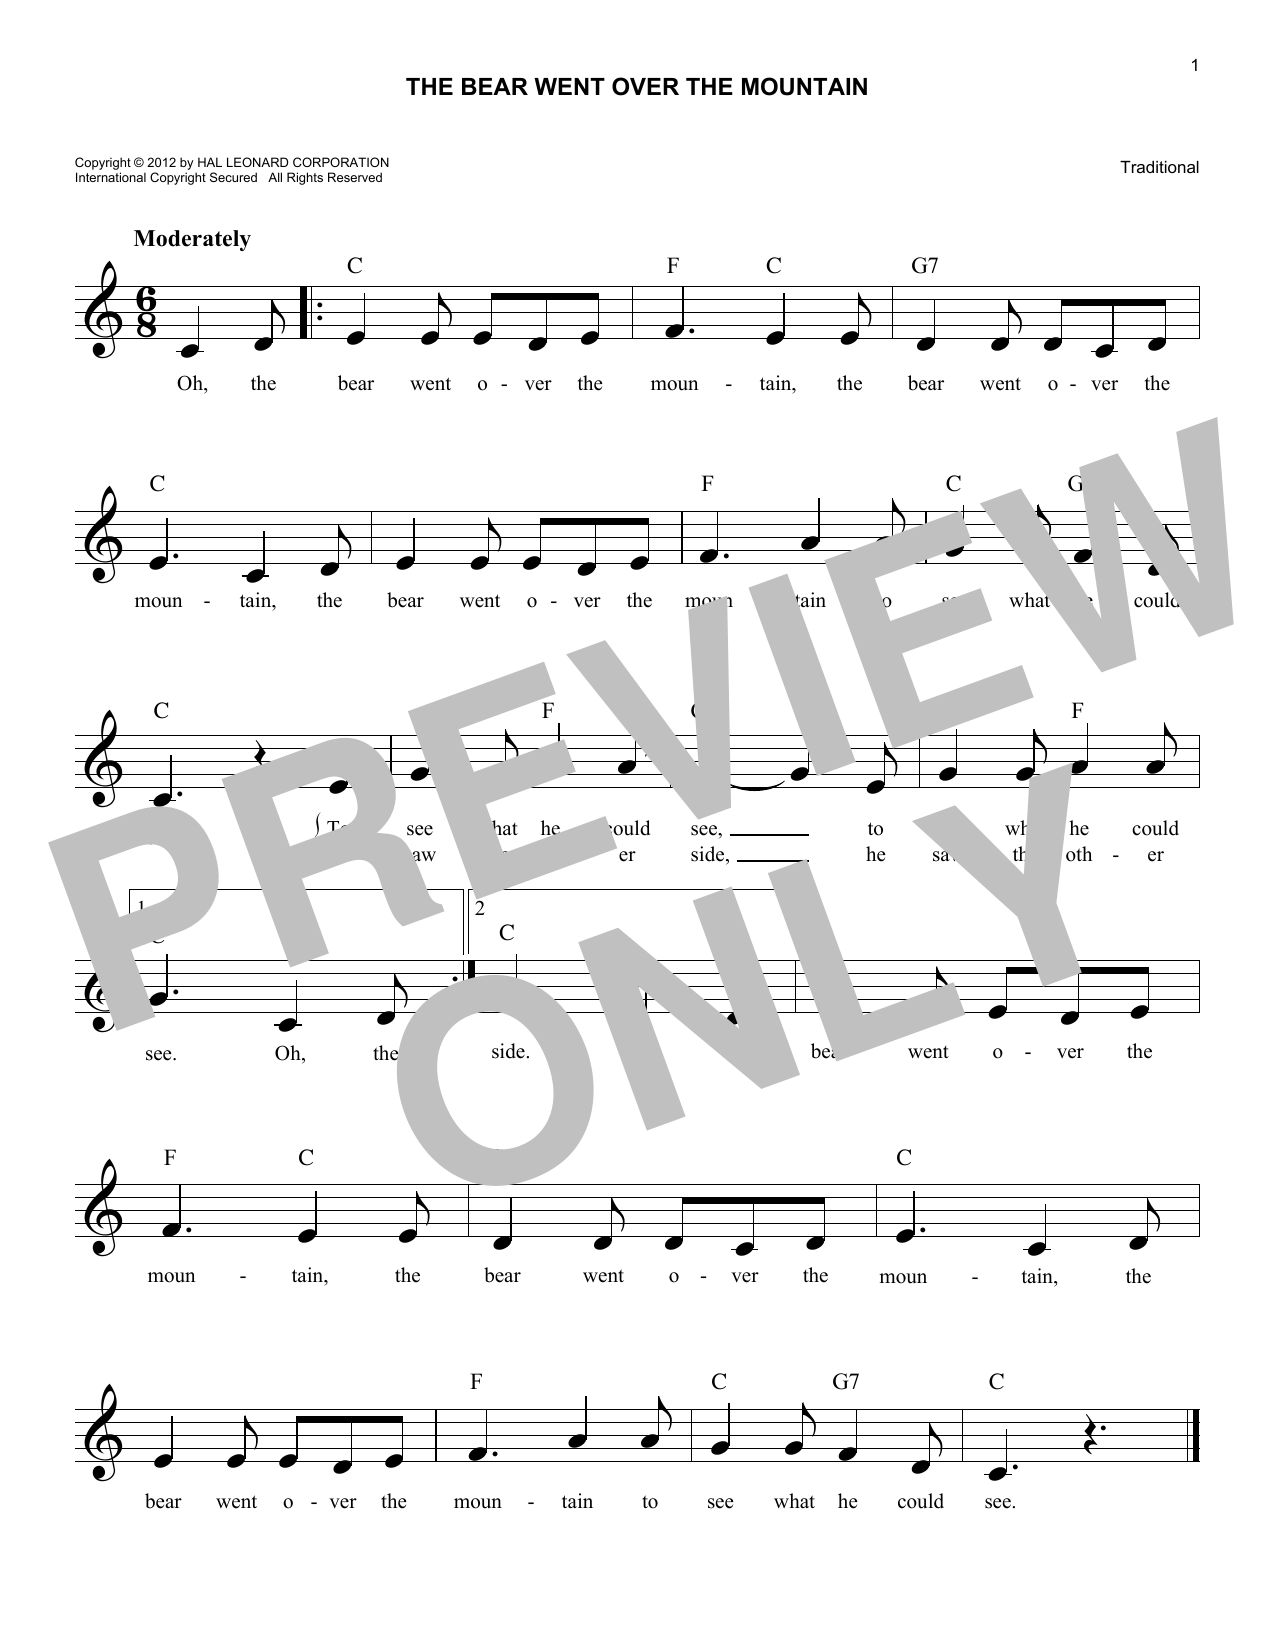 Download Traditional The Bear Went Over The Mountain Sheet Music